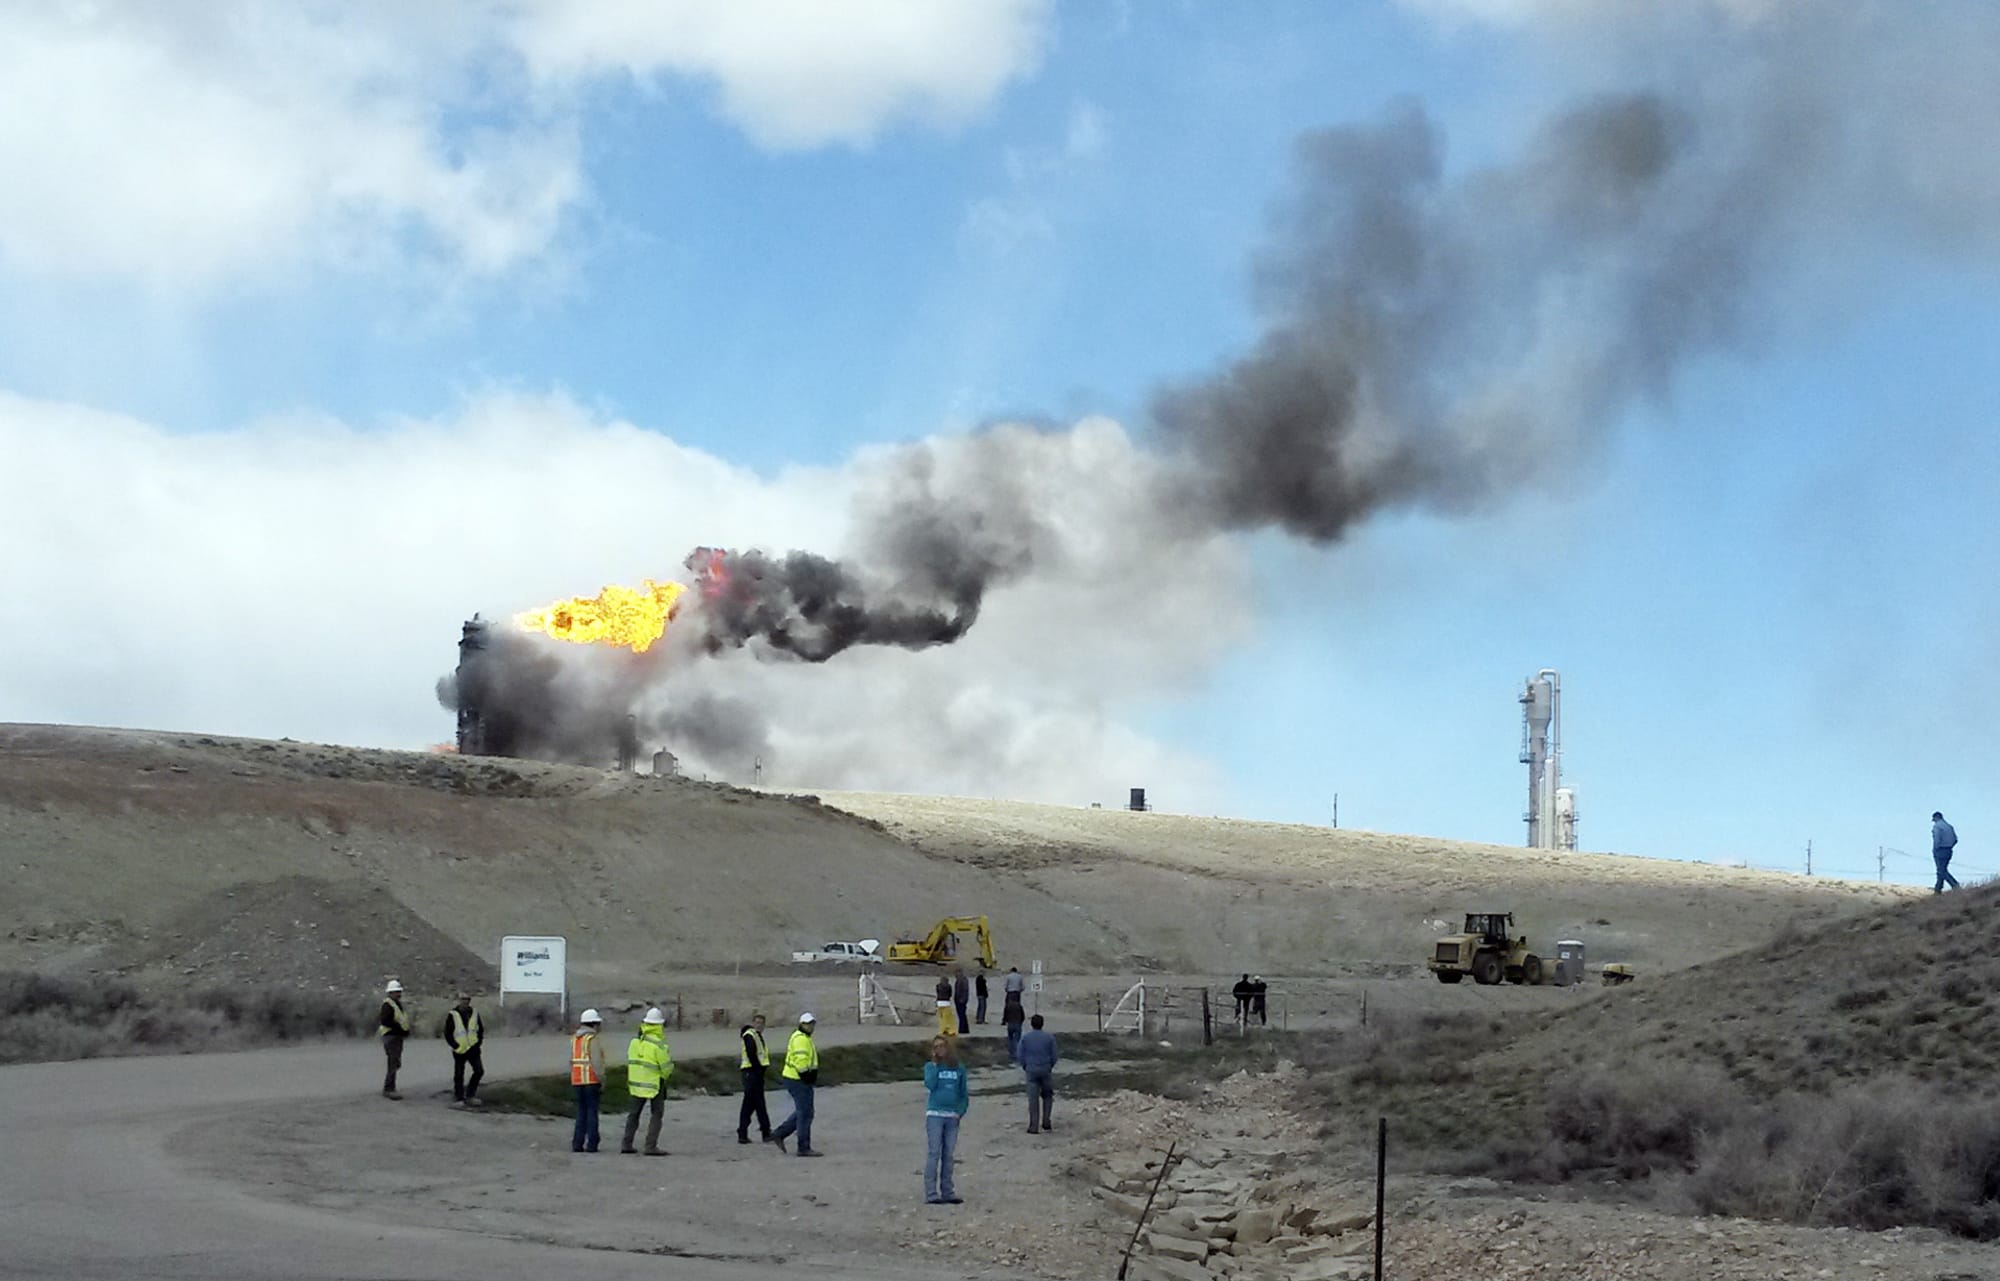 Smoke rises at the site of an explosion and fire at a natural gas processing facility and major national pipeline hub on Wednesday in Opal, Wyo.